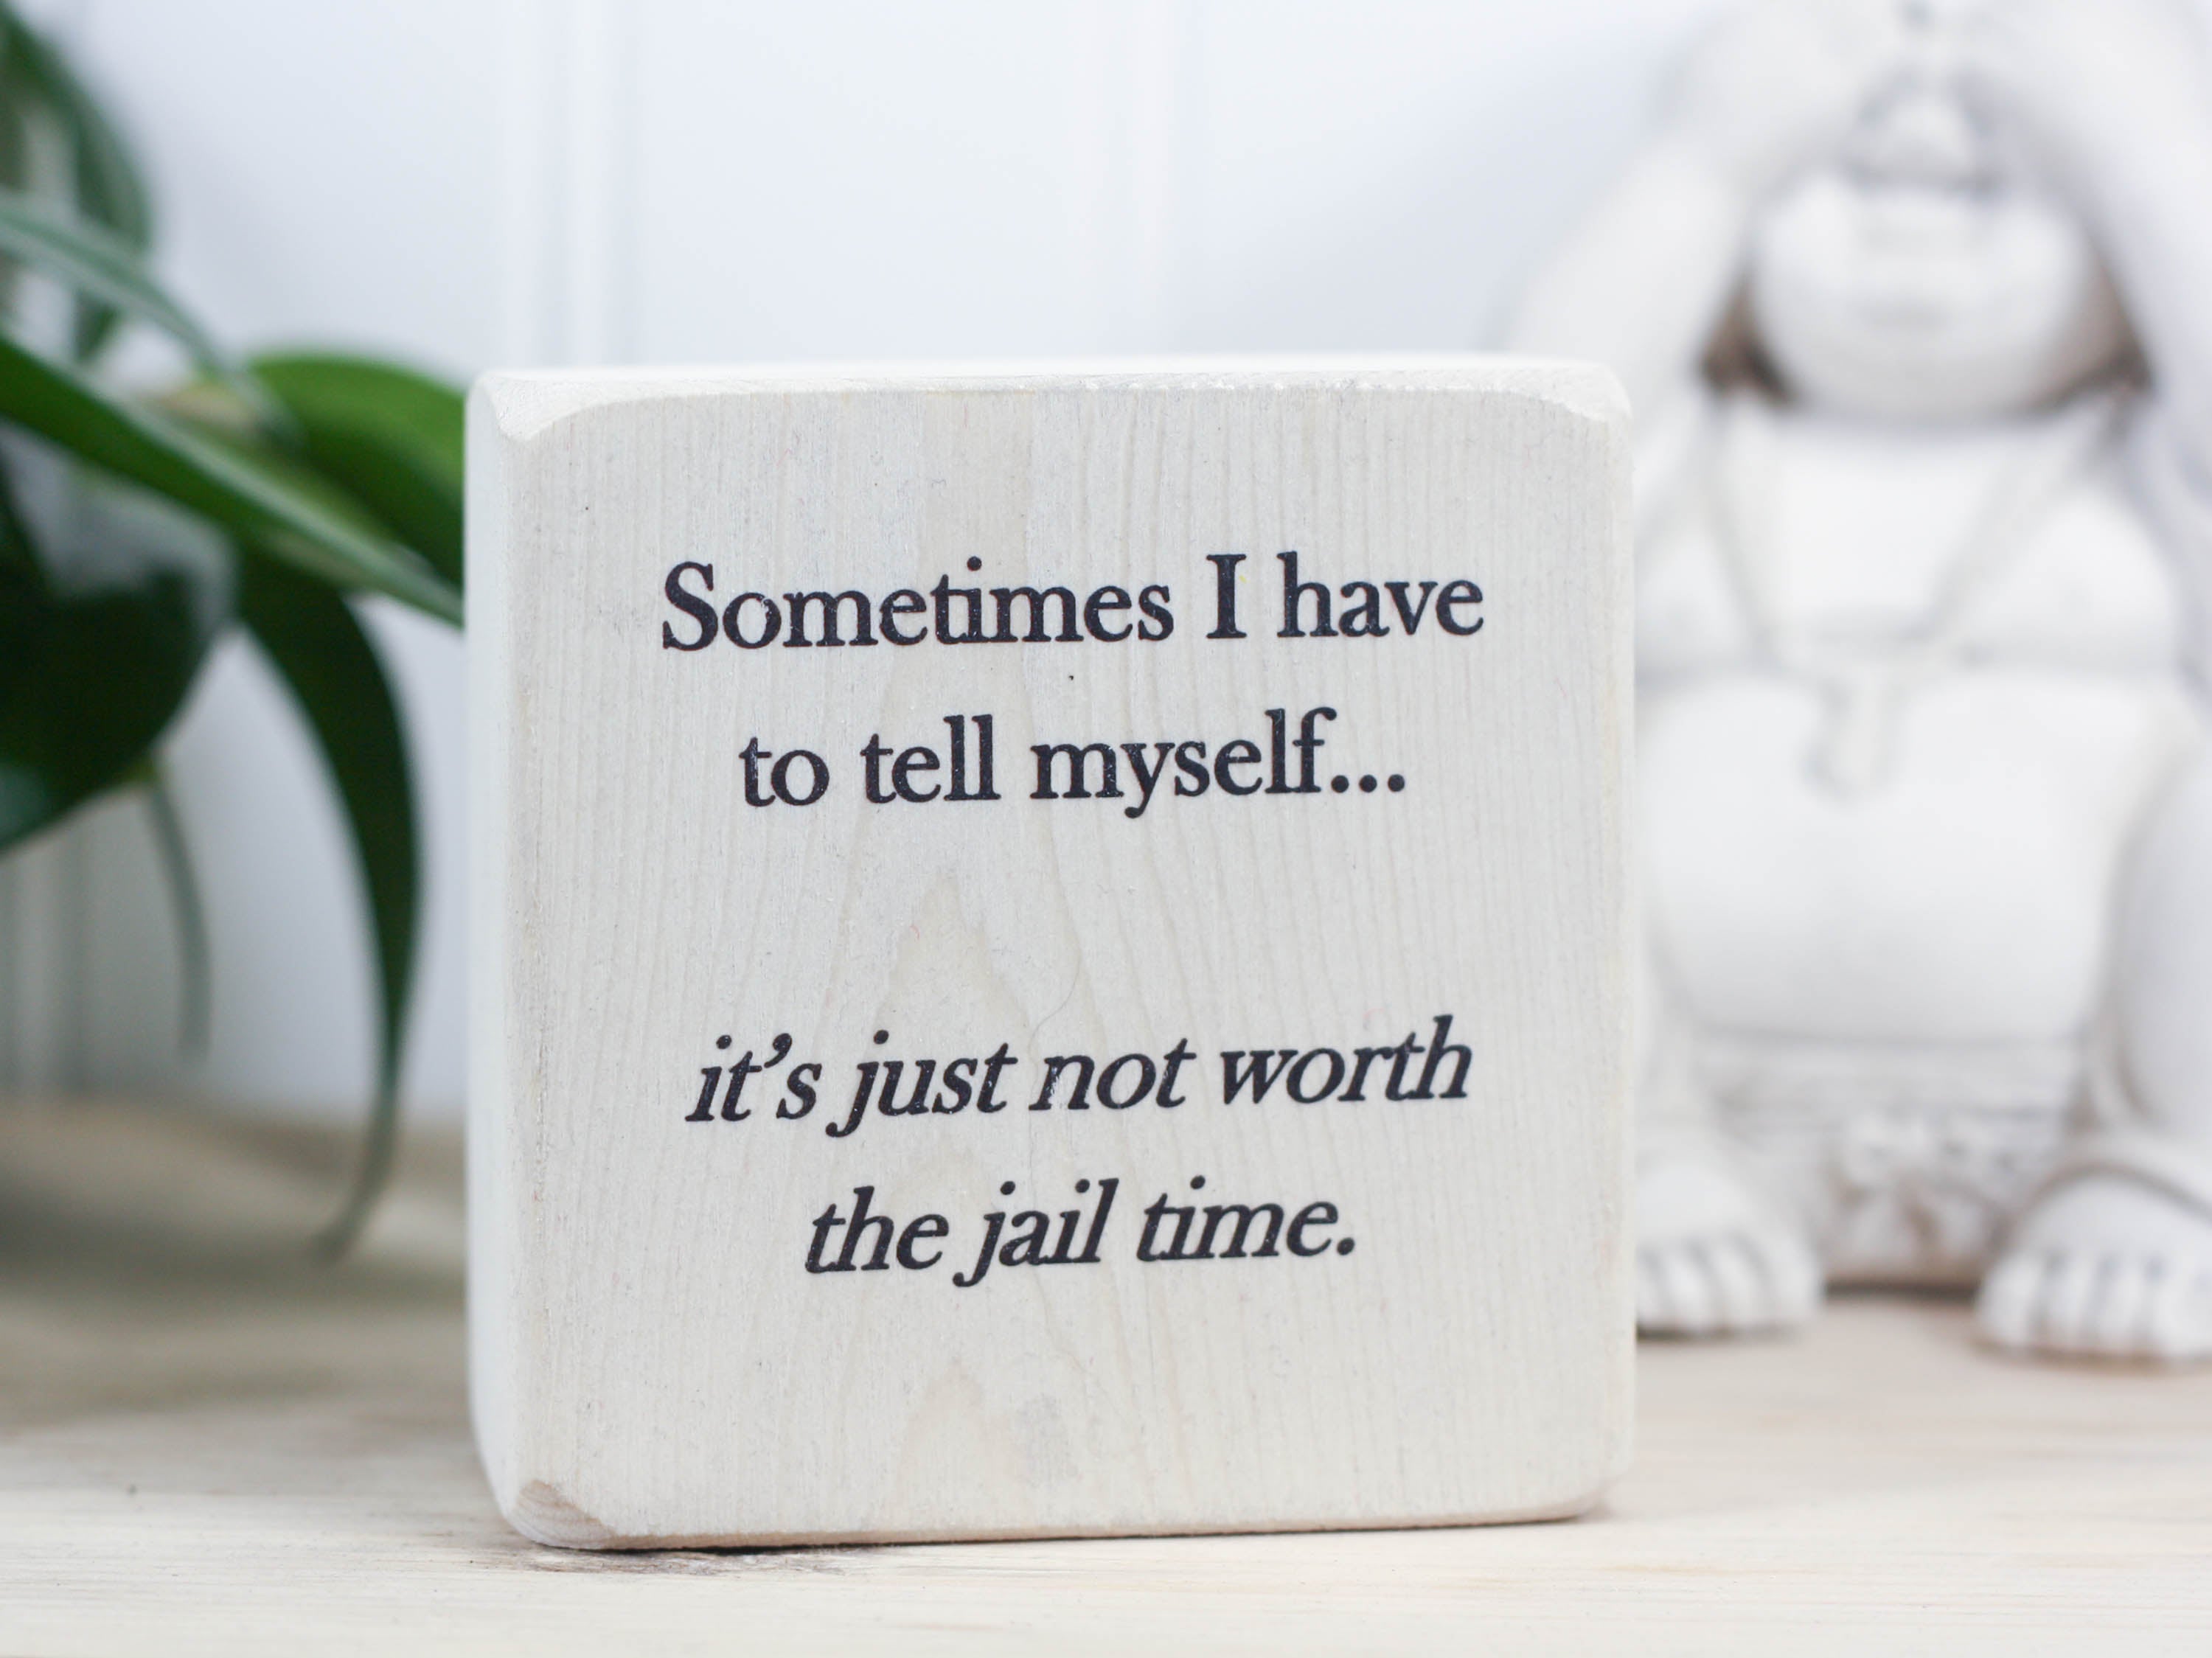 Funny small wood sign in whitewash with the saying "Sometimes I have to tell myself... it's just not worth the jail time."